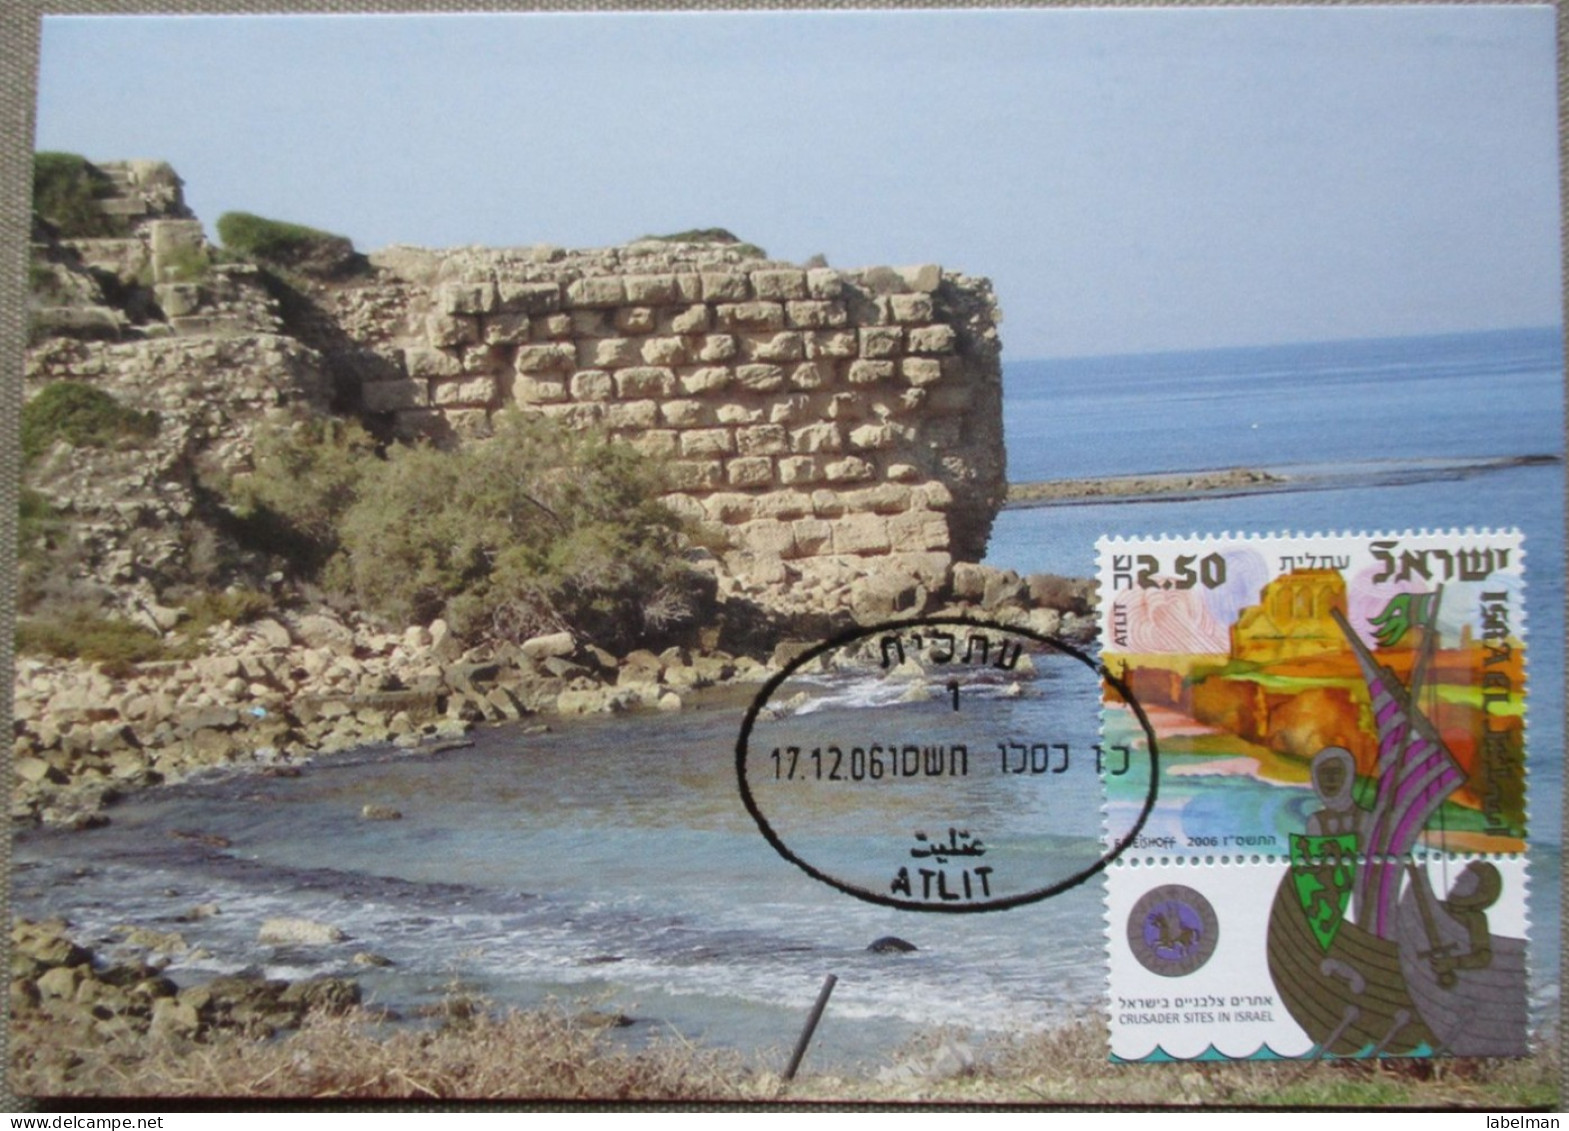 ISRAEL 2006 MAXIMUM CARD POSTCARD ATLIT FORTRESS FIRST DAY OF ISSUE CARTOLINA CARTE POSTALE POSTKARTE CARTOLINA - Maximum Cards